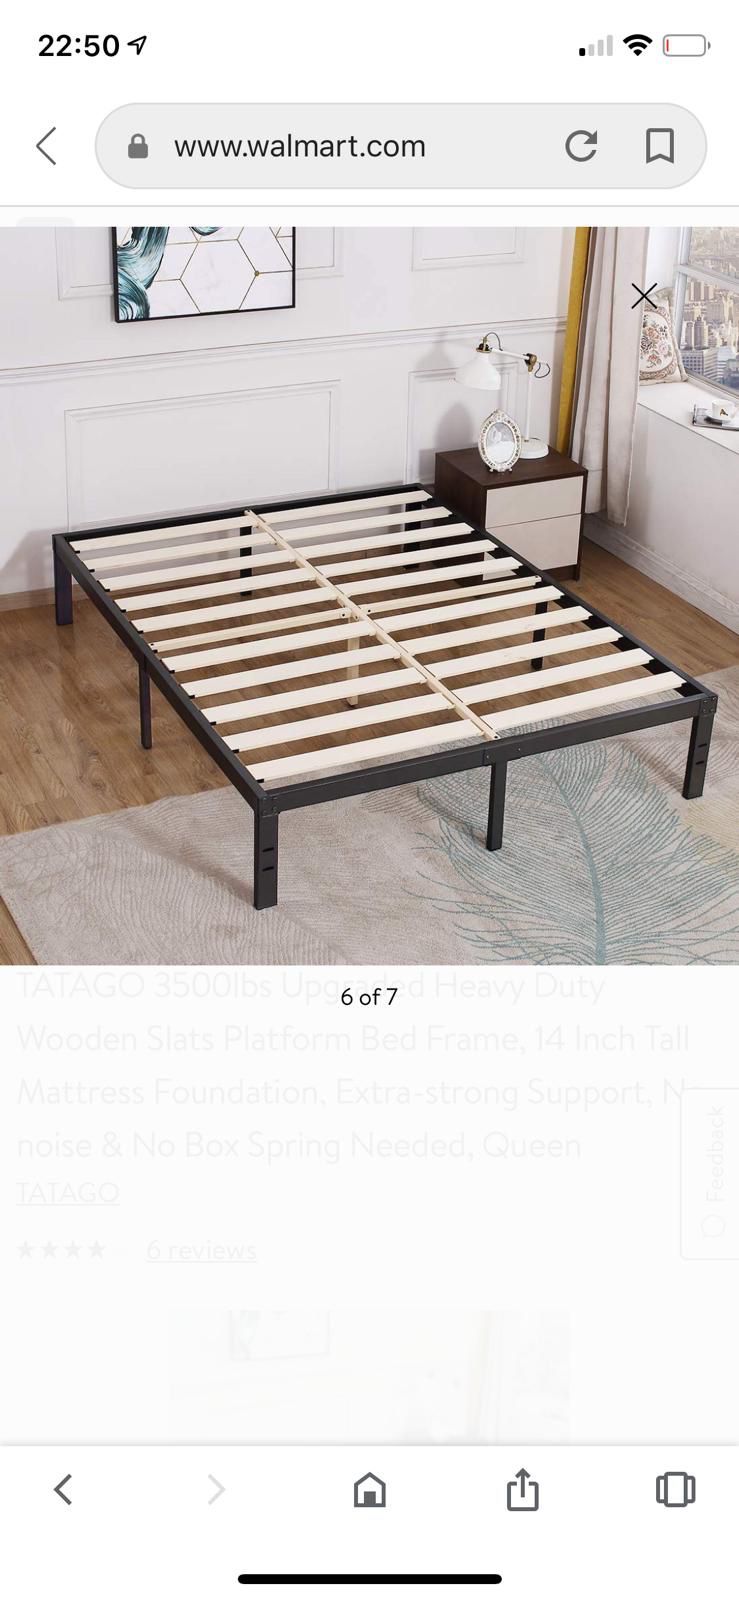 TWIN size bed frame and mattress -TATAGO Heavy Duty Wooden Slats Platform Bed Frame, No noise & No Box Spring Needed TWIN size